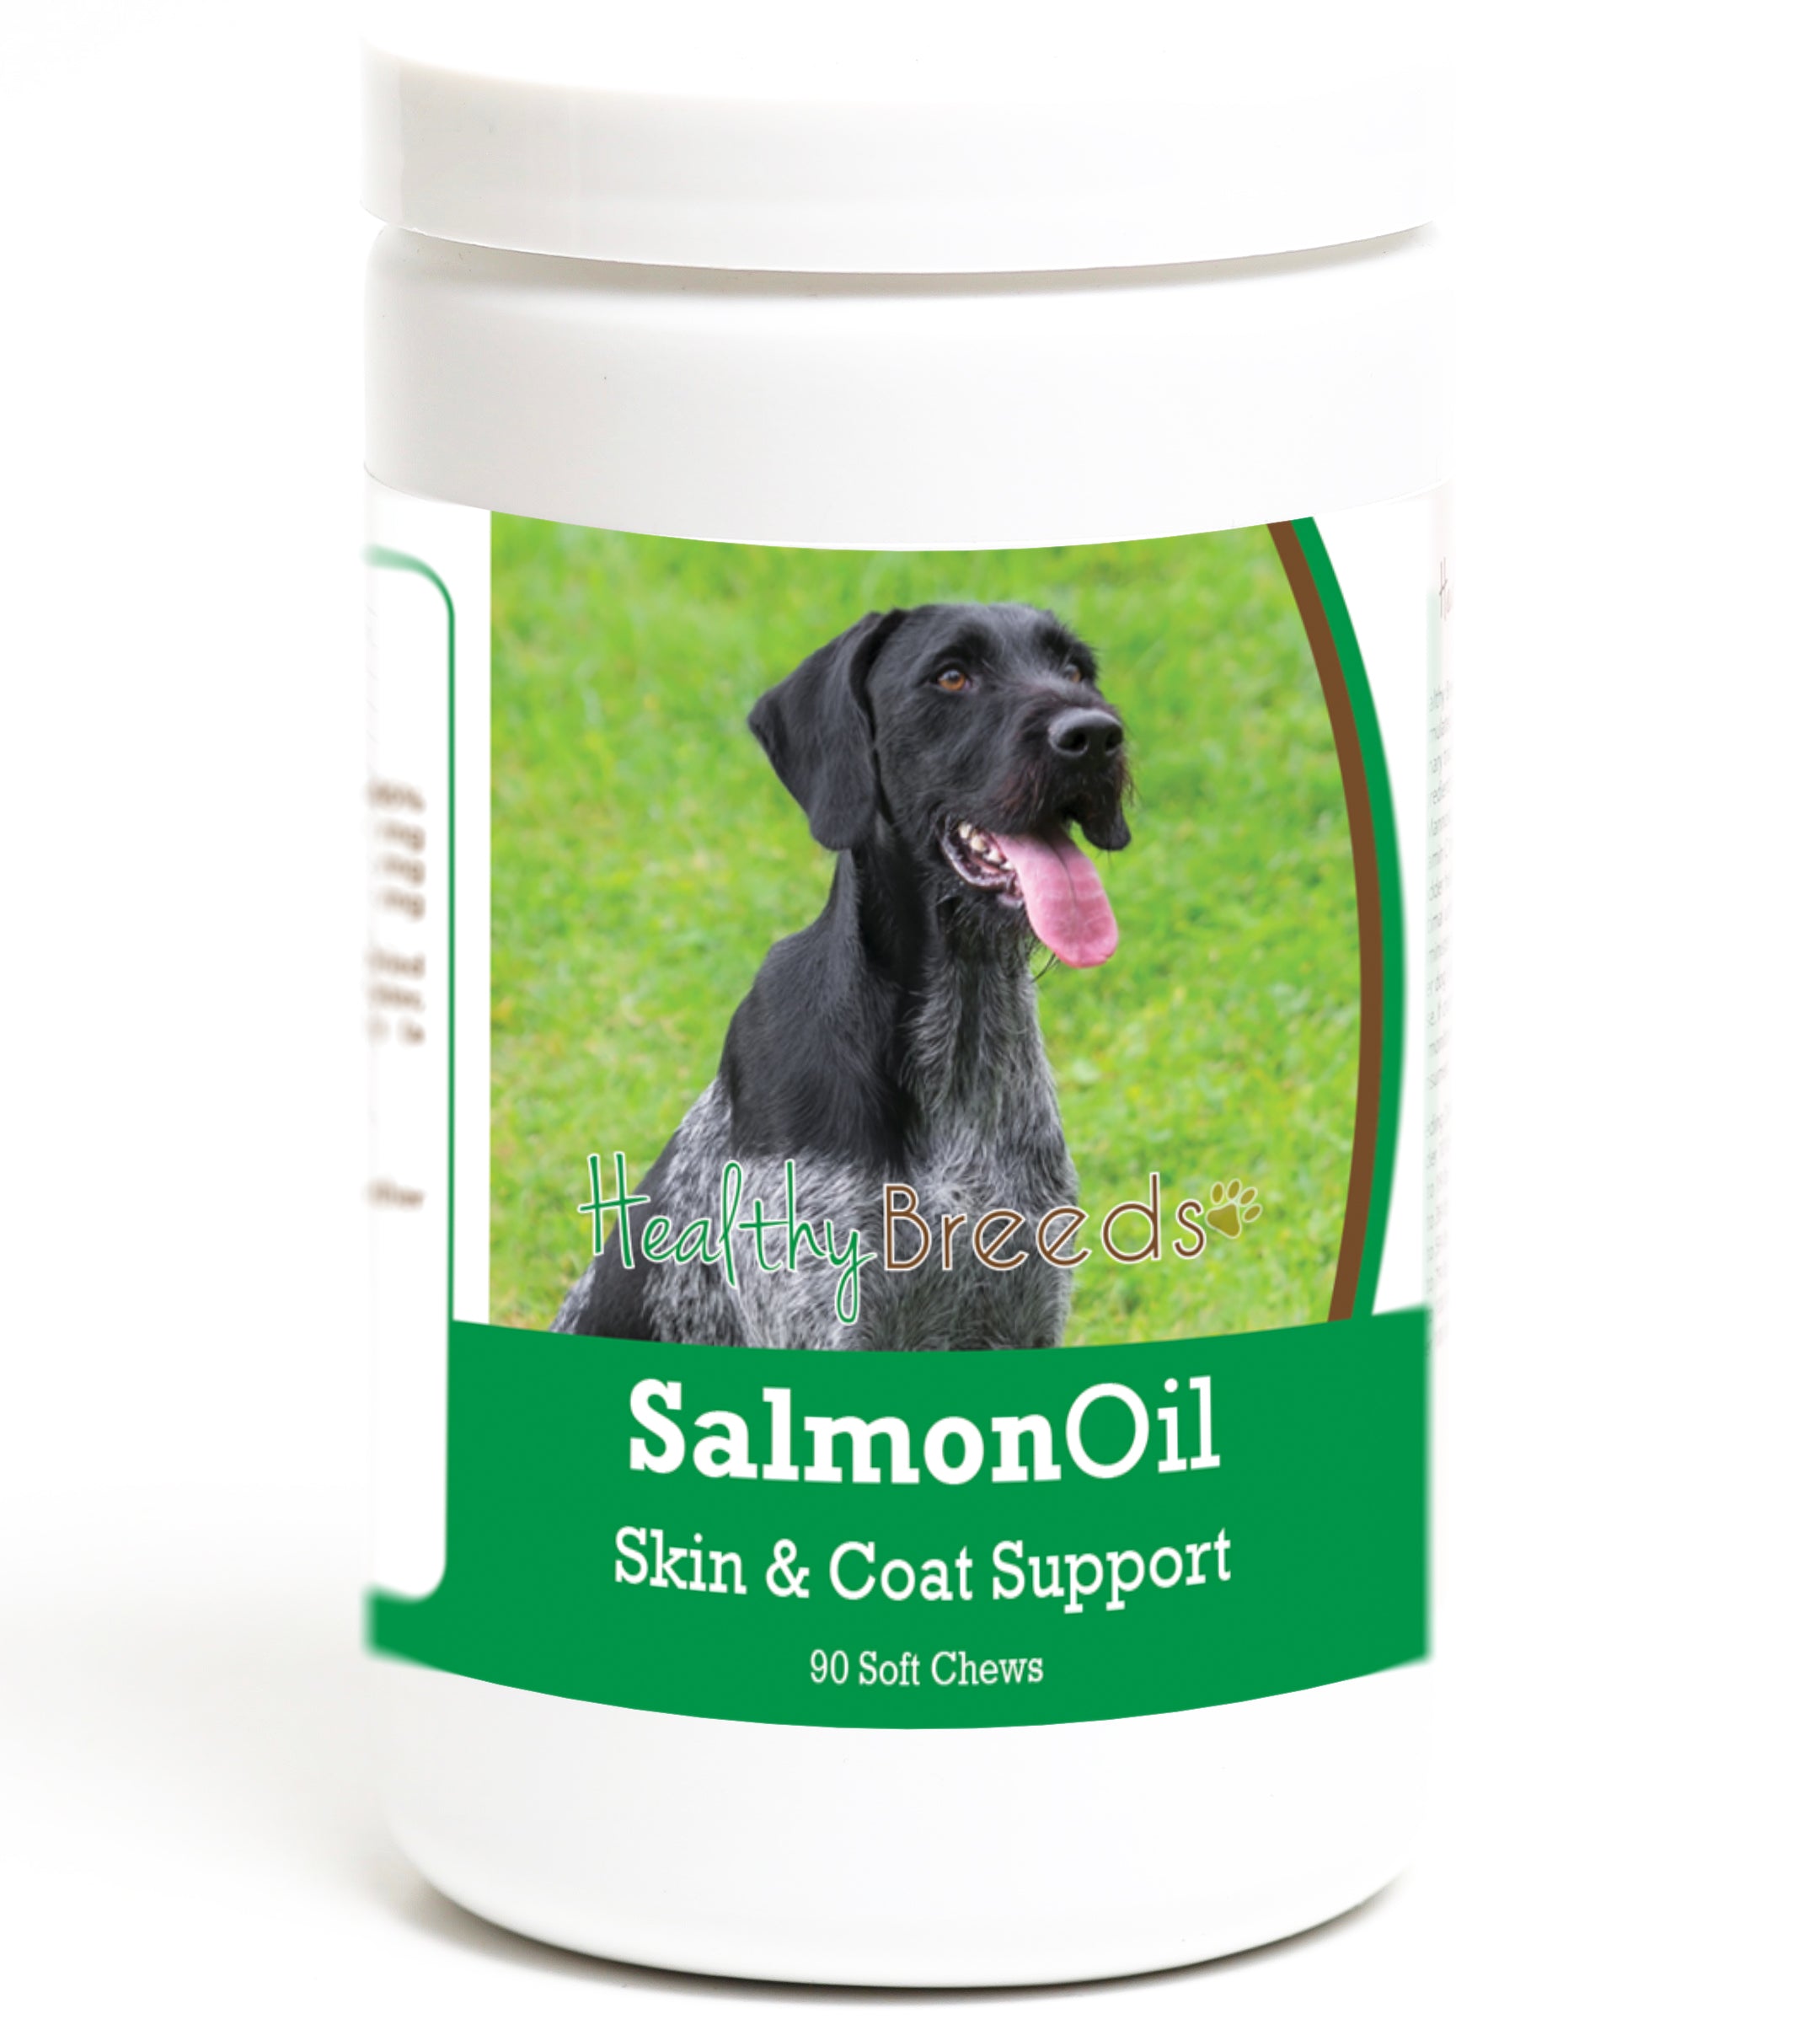 German Wirehaired Pointer Salmon Oil Soft Chews 90 Count